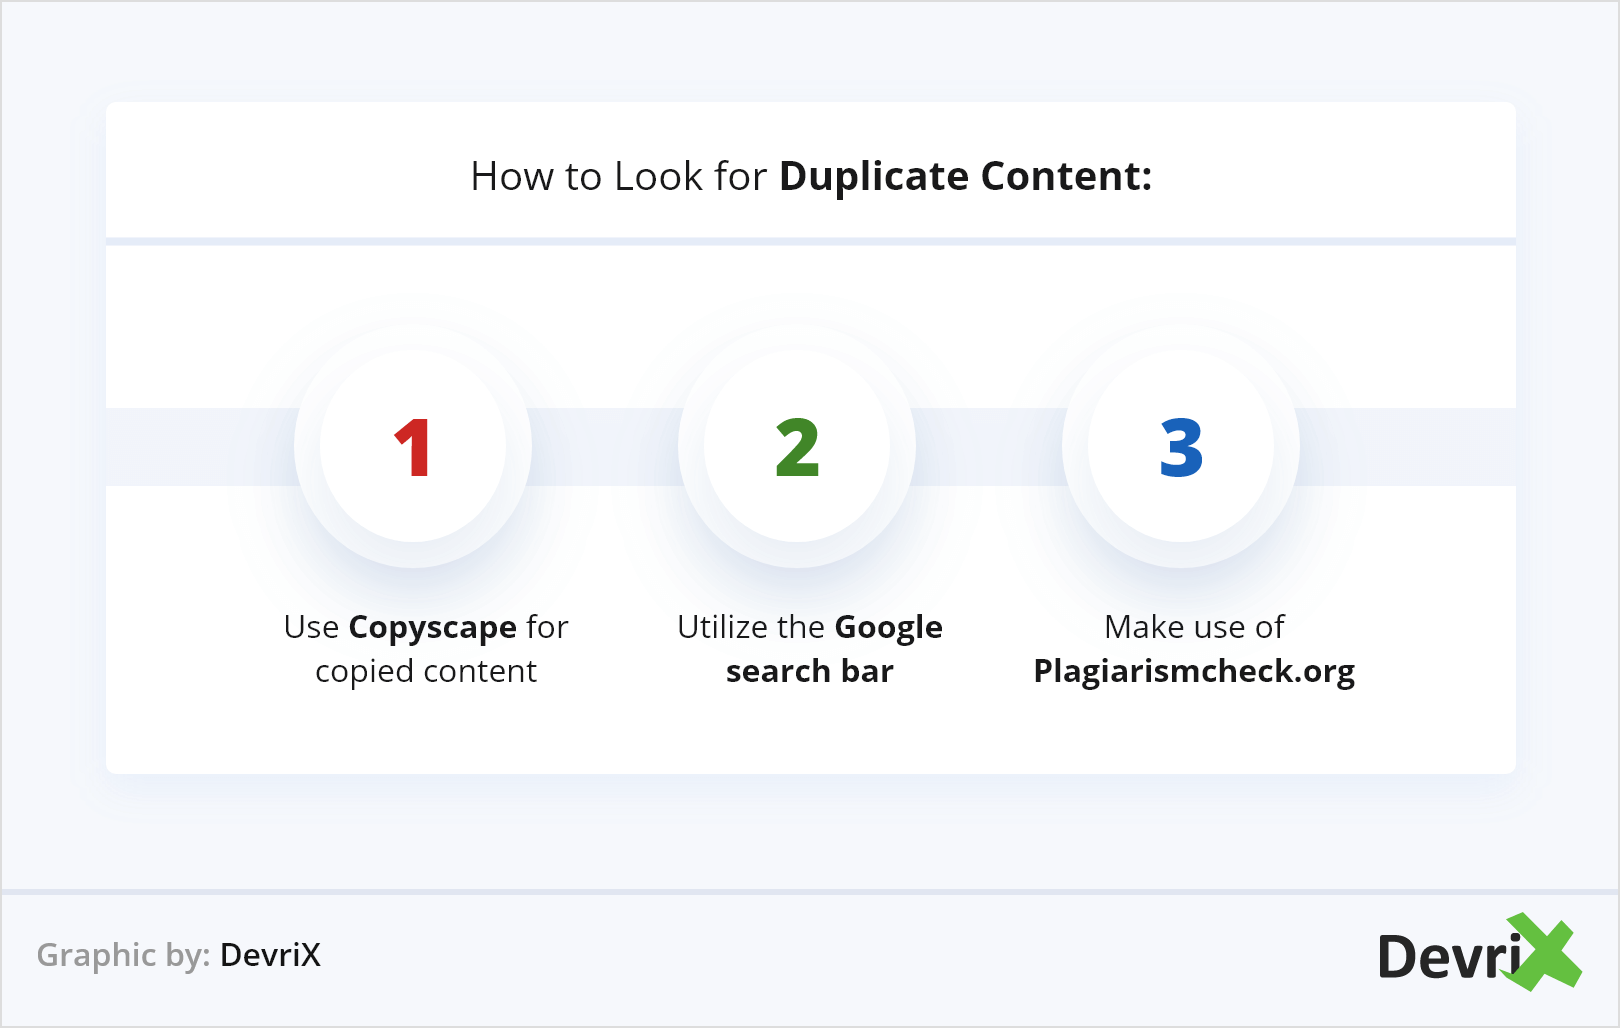 How to Look for Duplicate Content